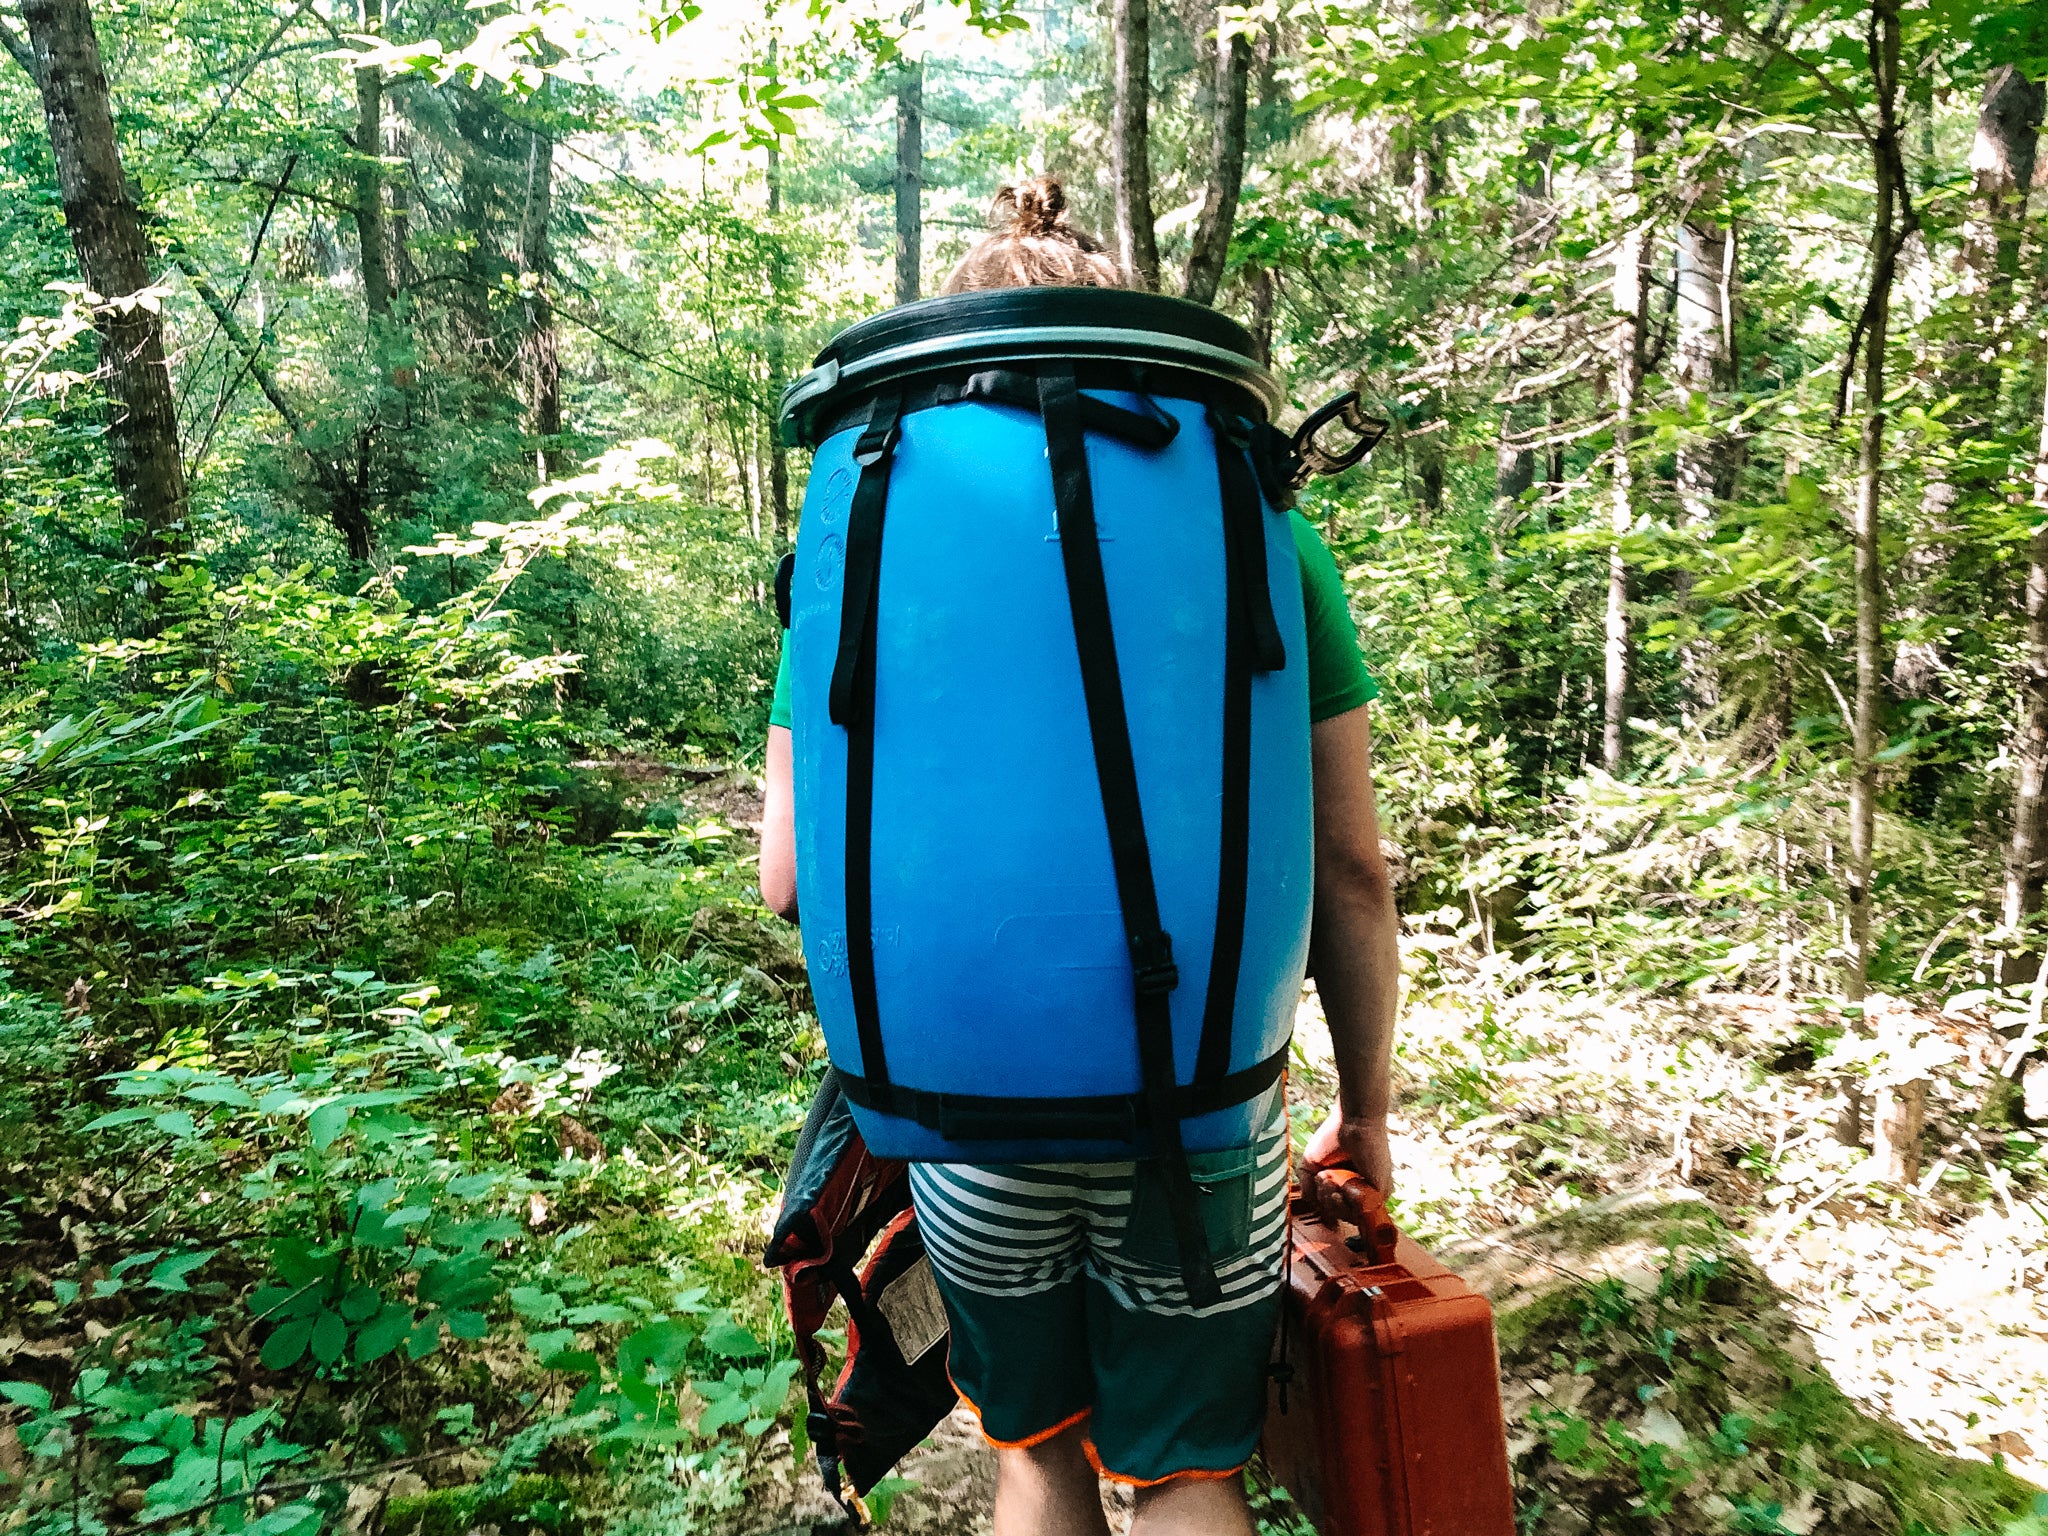 Man carrying a barrel on his back through the portage trail